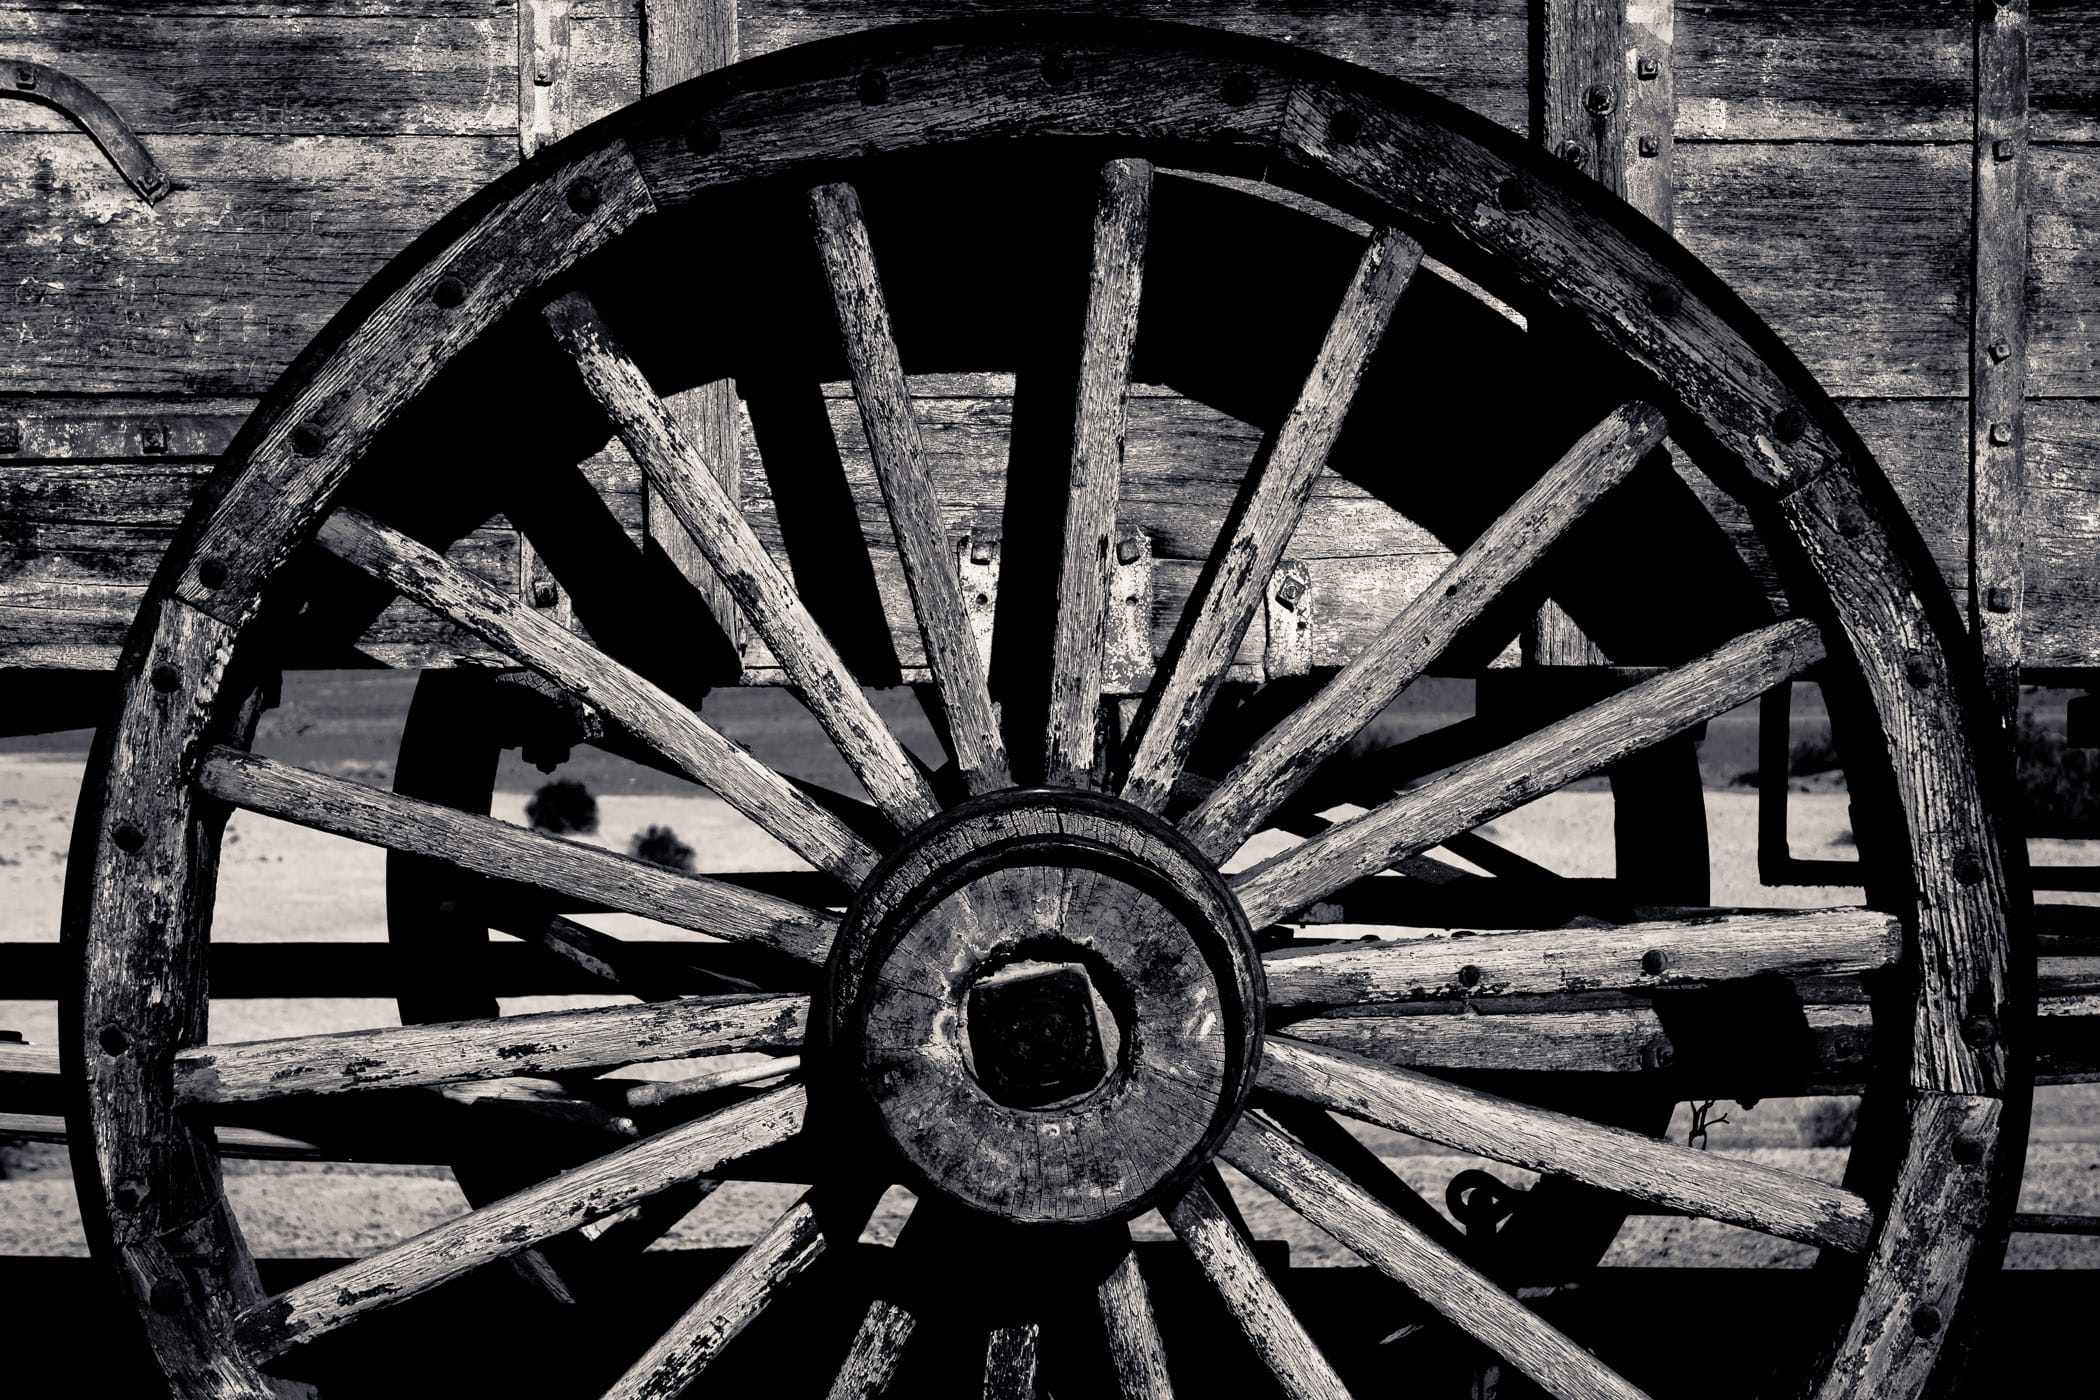 Detail of a wheel on an old borax-hauling wagon train on display at the Harmony Borax Works in California’s Death Valley National Park.